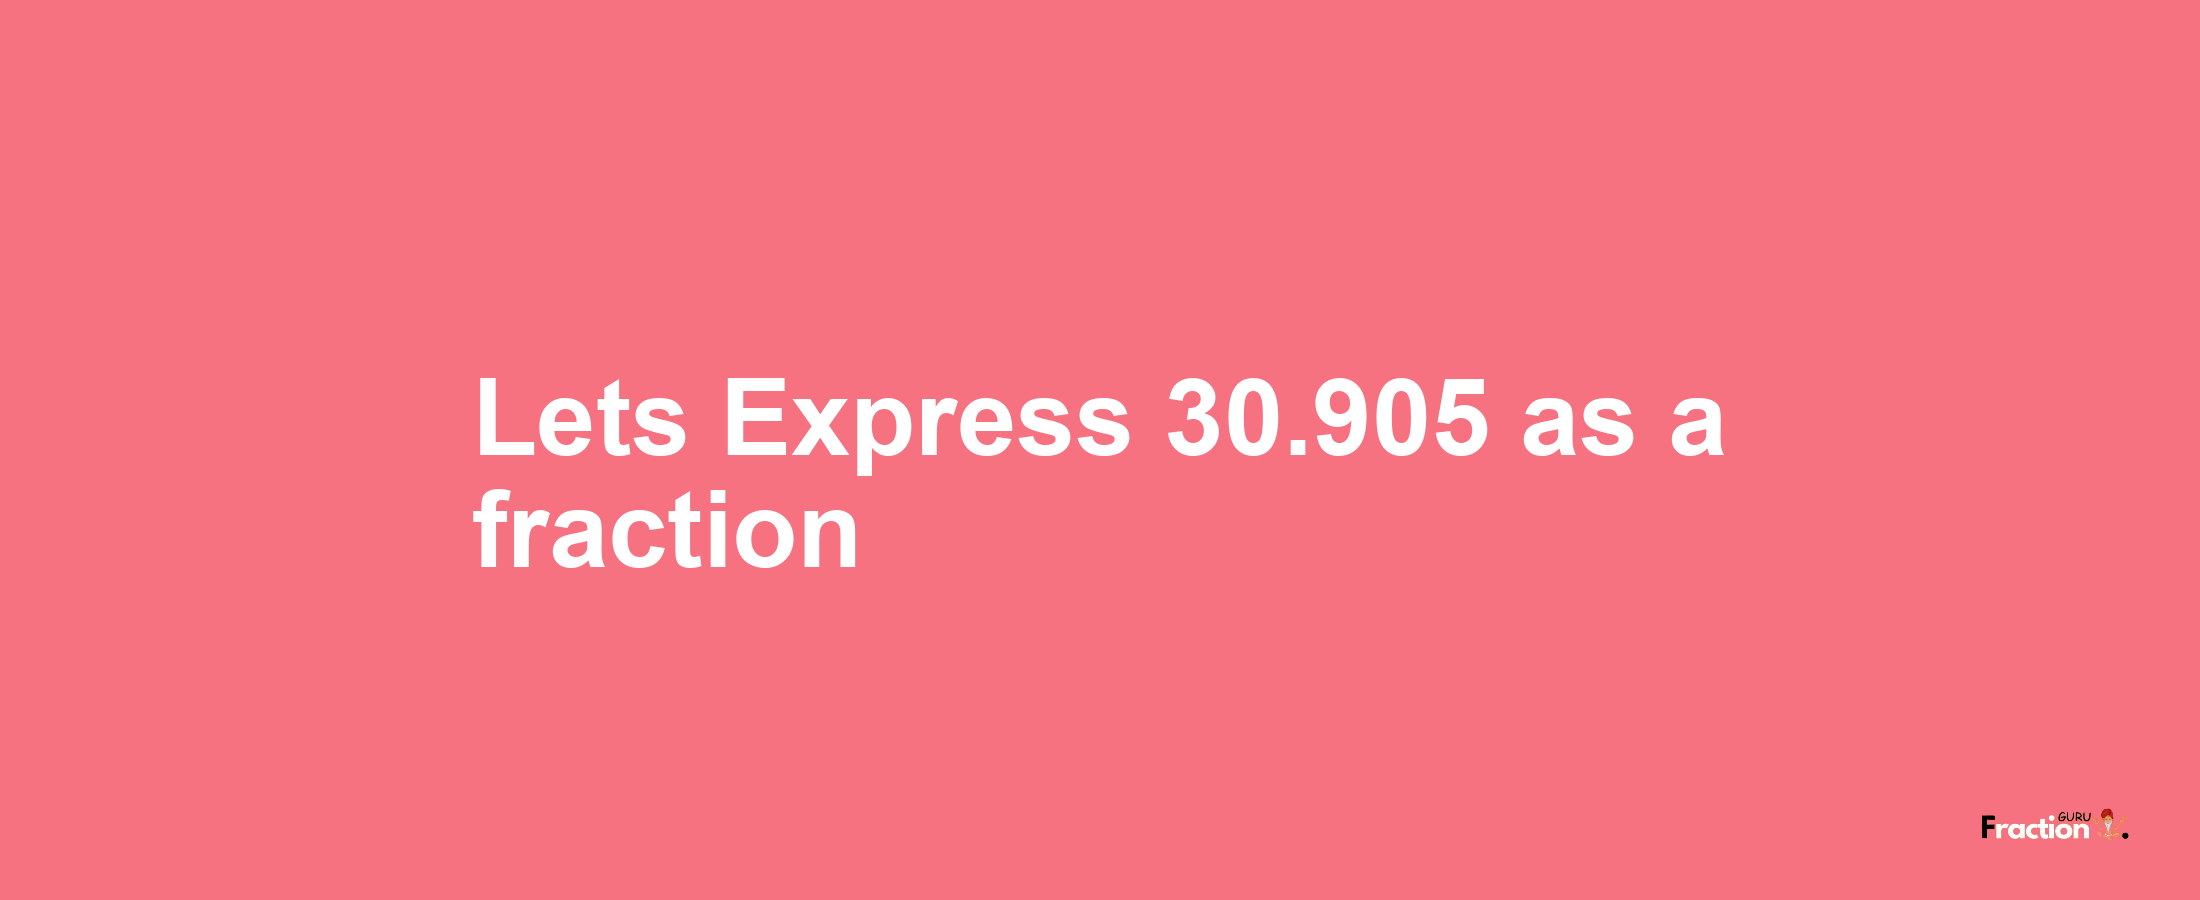 Lets Express 30.905 as afraction